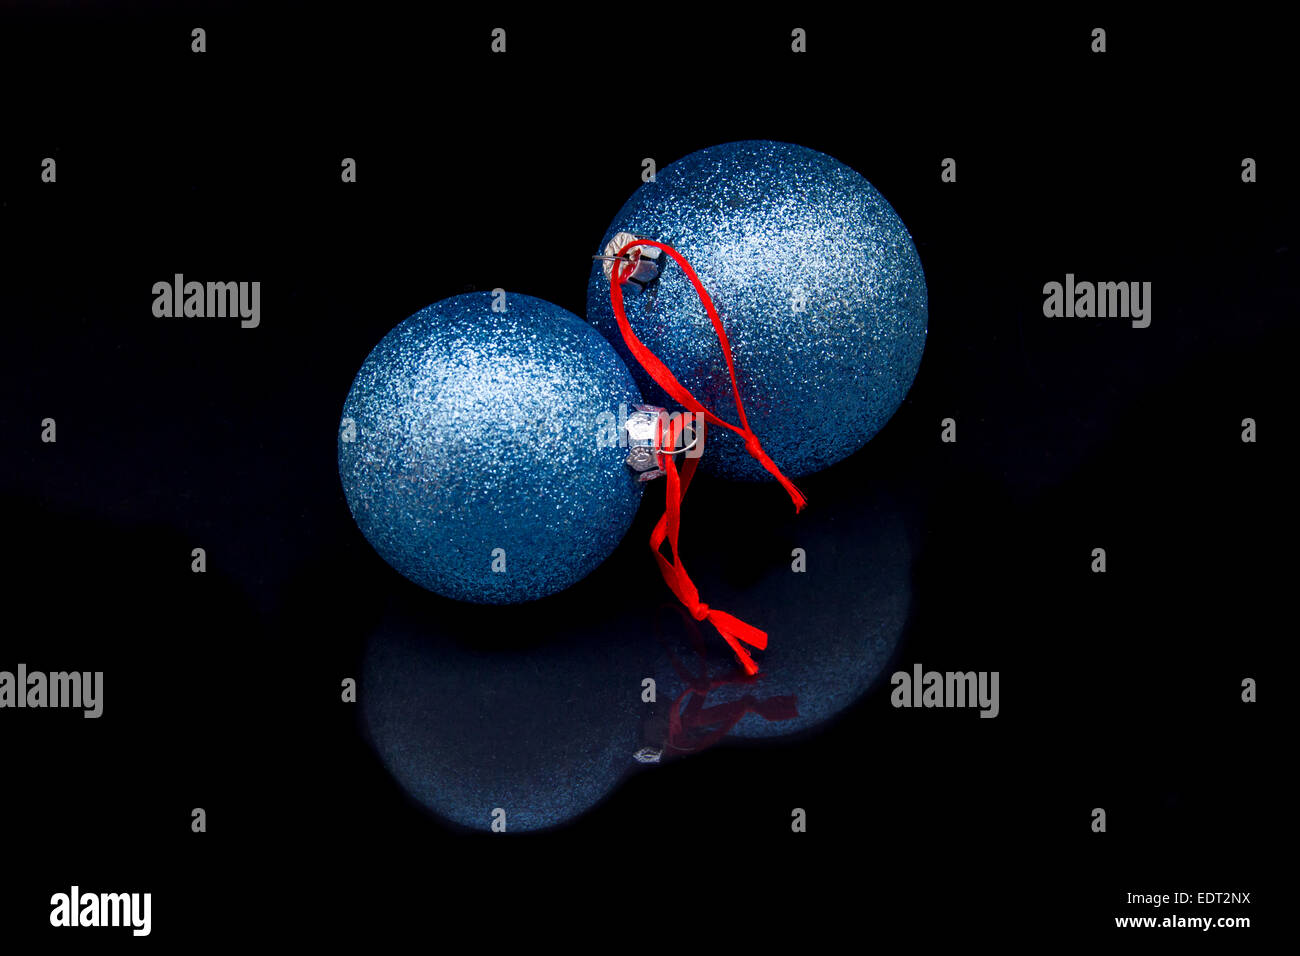 Christmas glitter balls that are reflected on a black background Stock Photo